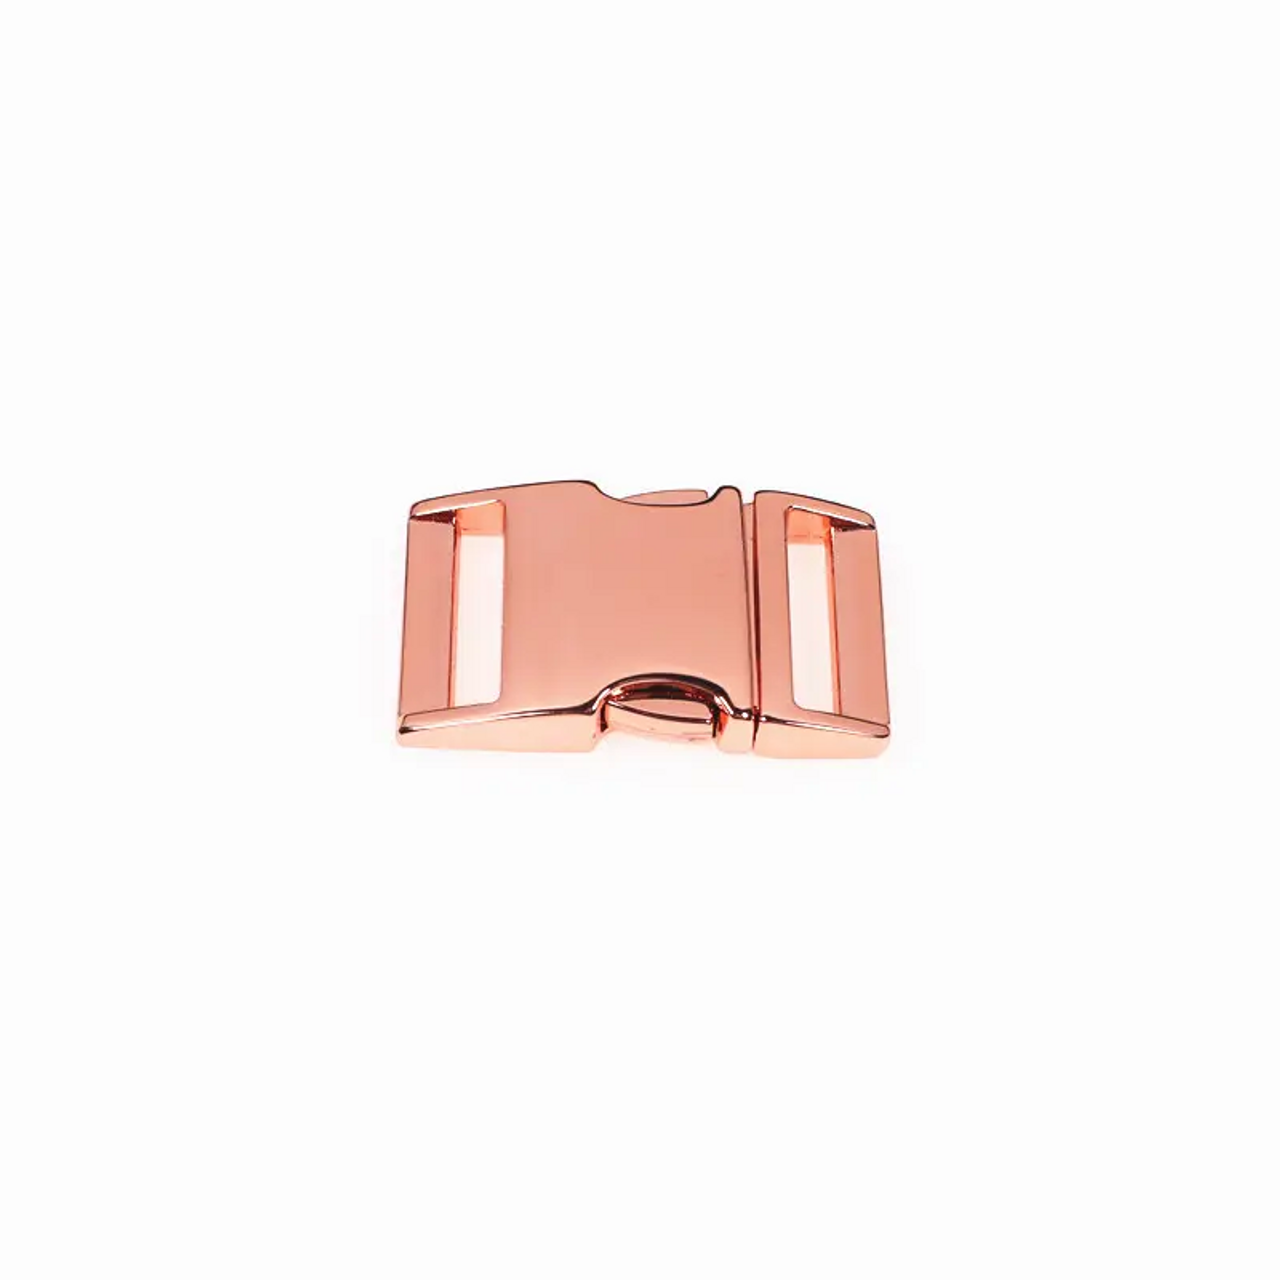 PS22 Super Tension Curved Side Release Buckle – BuckleRus